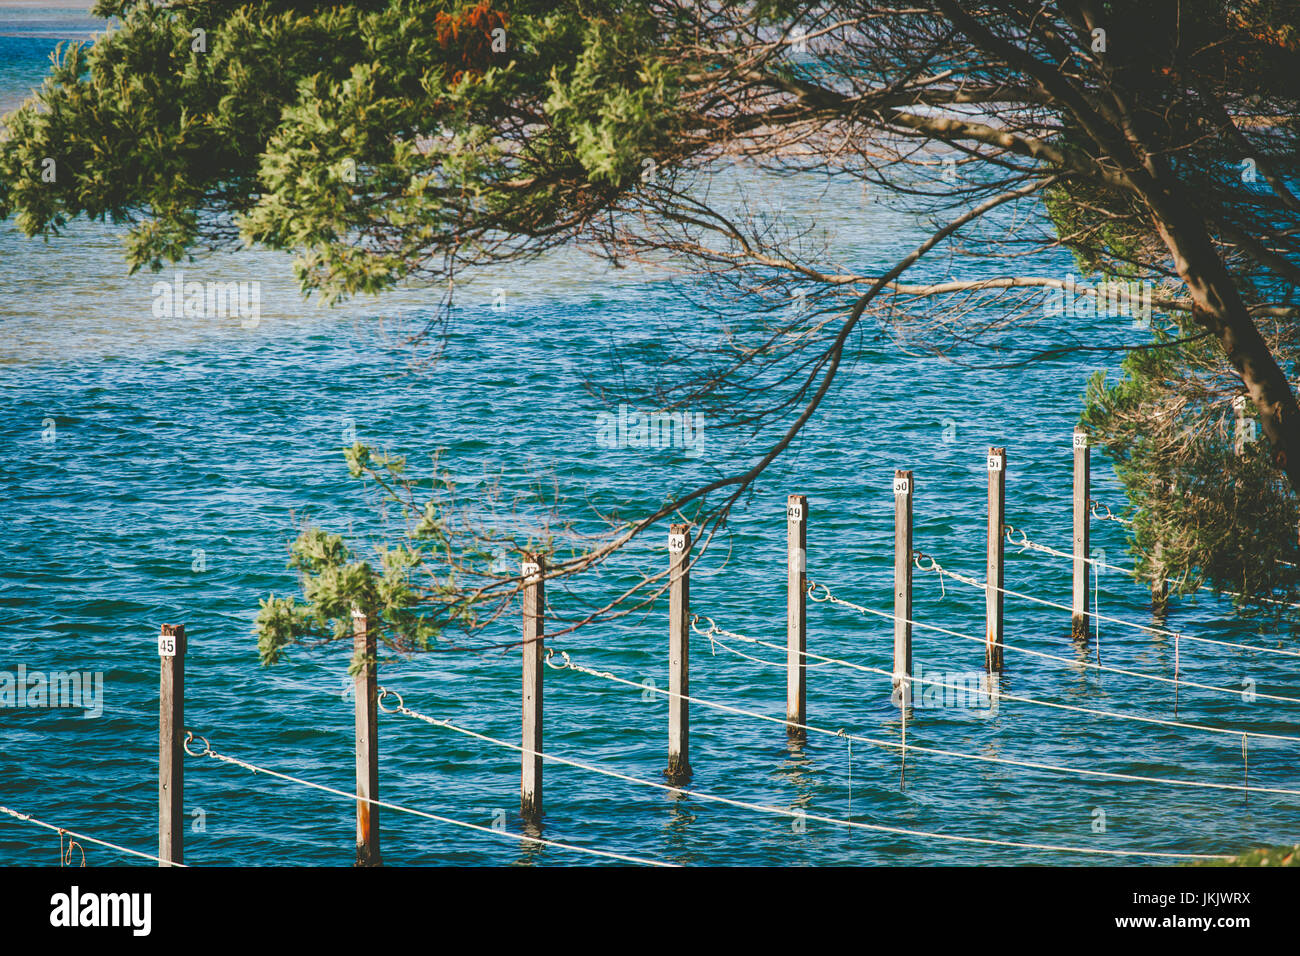 Numbered docking poles with ropes for fishing boats. Ocean shallow water and native Australian trees Stock Photo